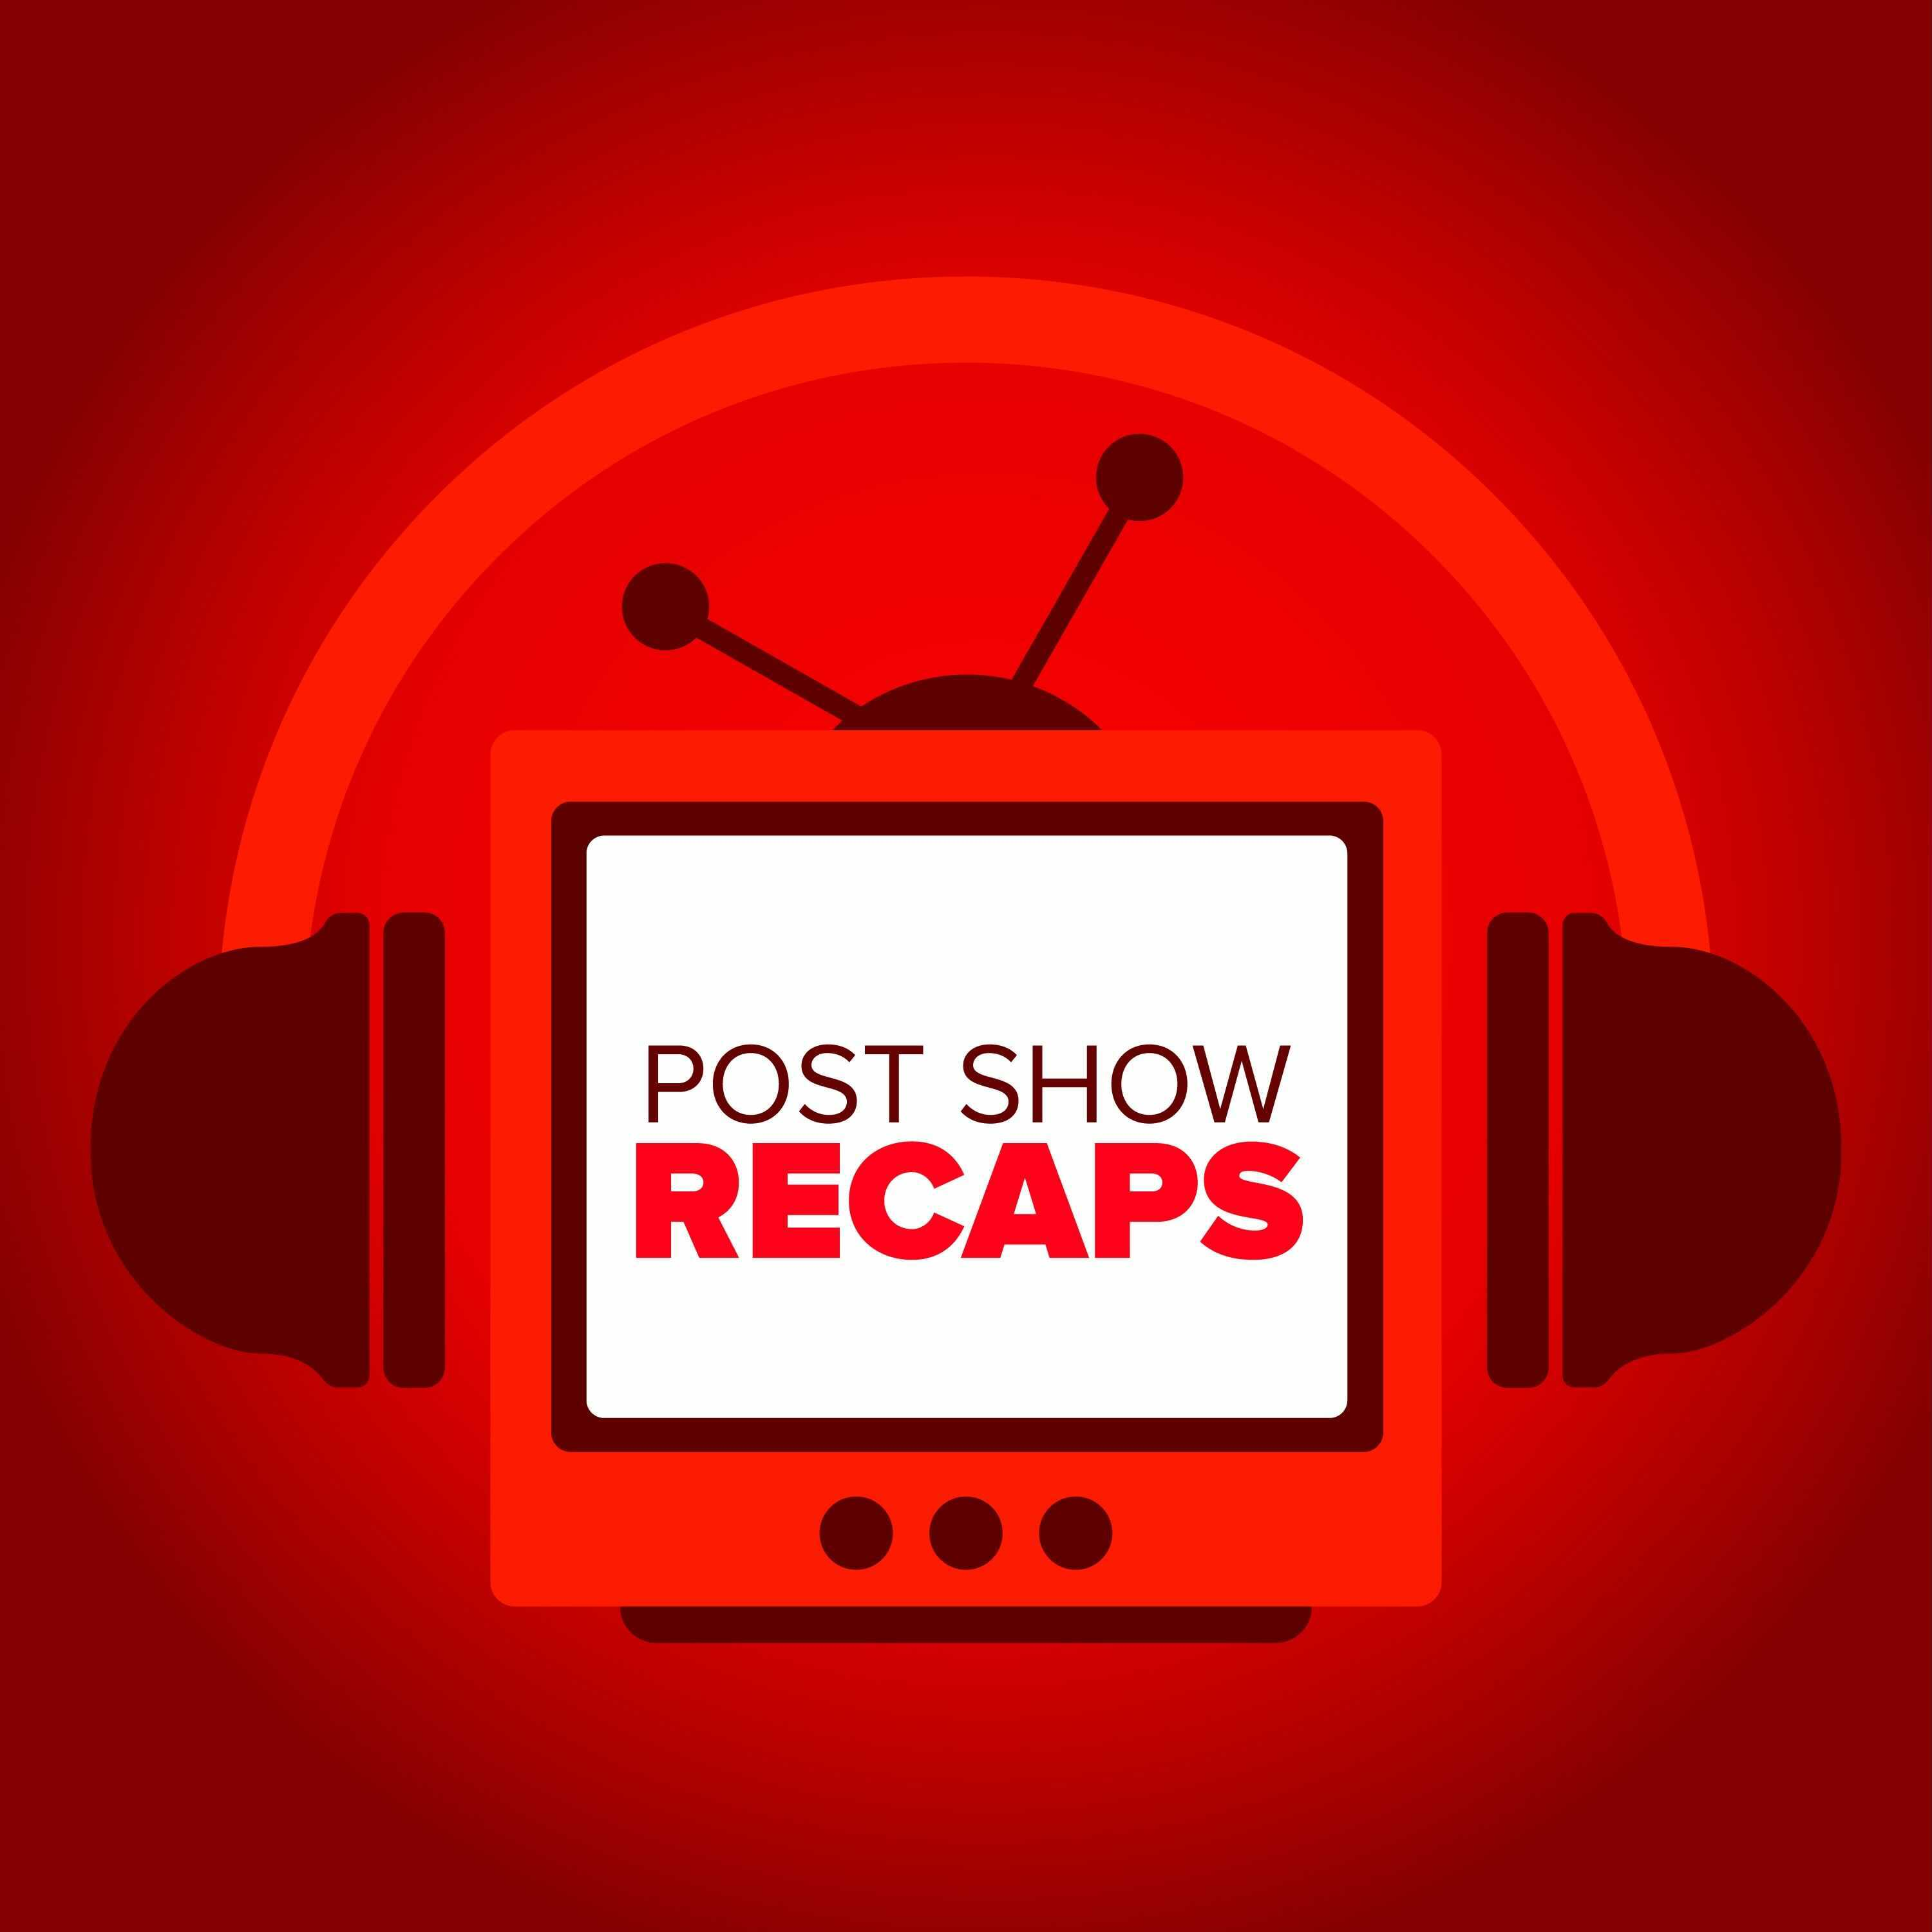 Post Show Recaps: TV & Movie Podcasts from Josh Wigler and Friends